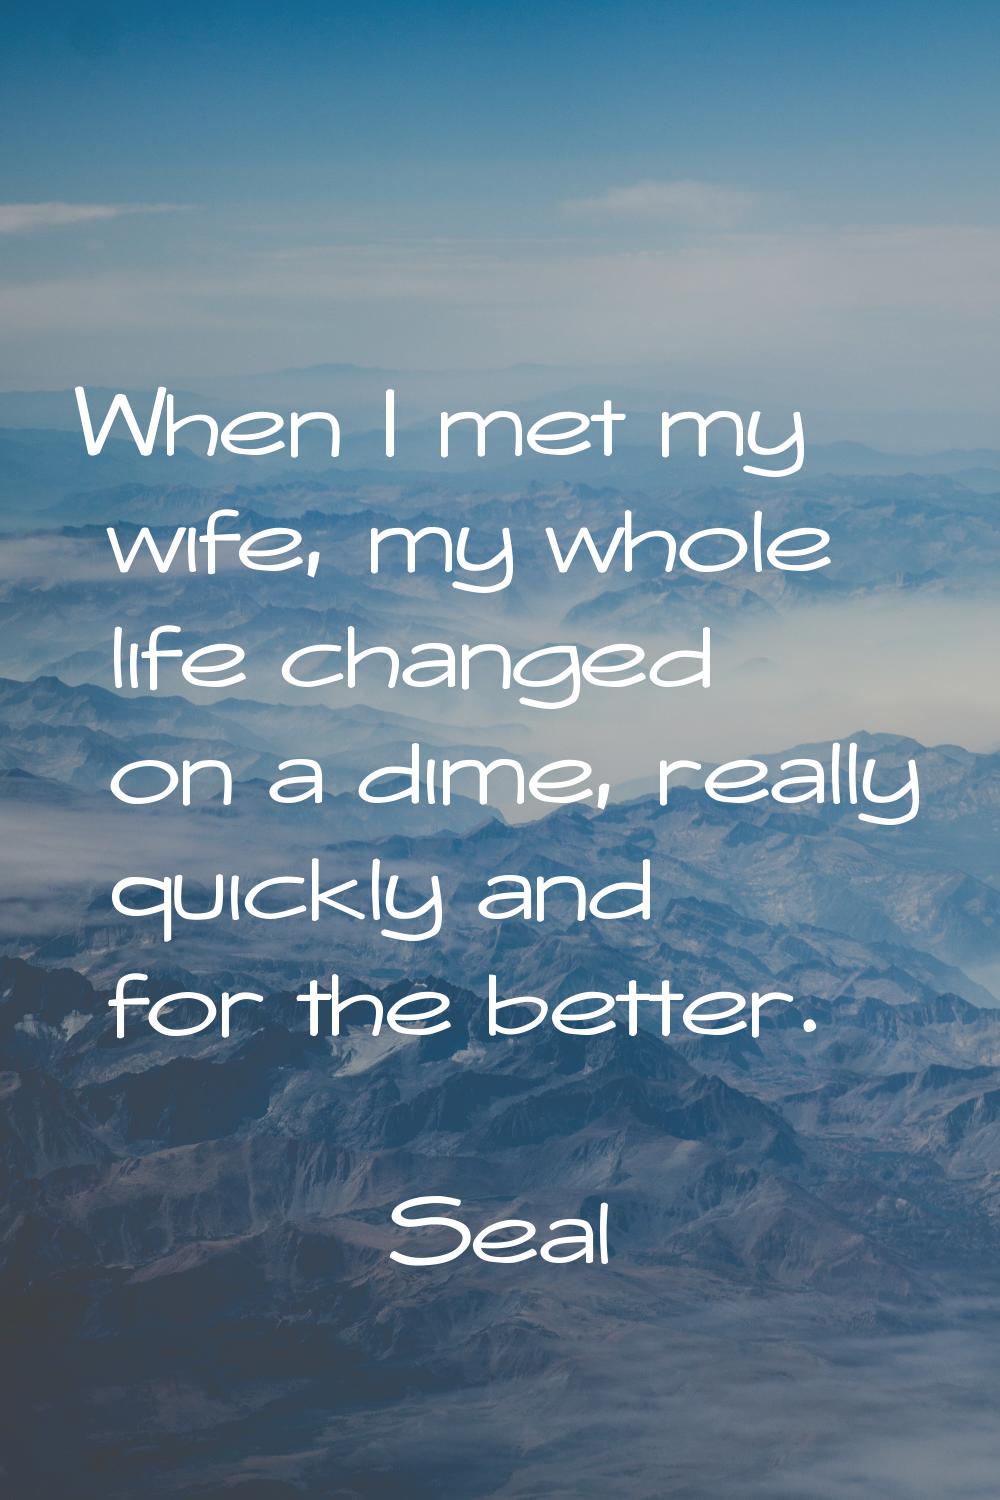 When I met my wife, my whole life changed on a dime, really quickly and for the better.